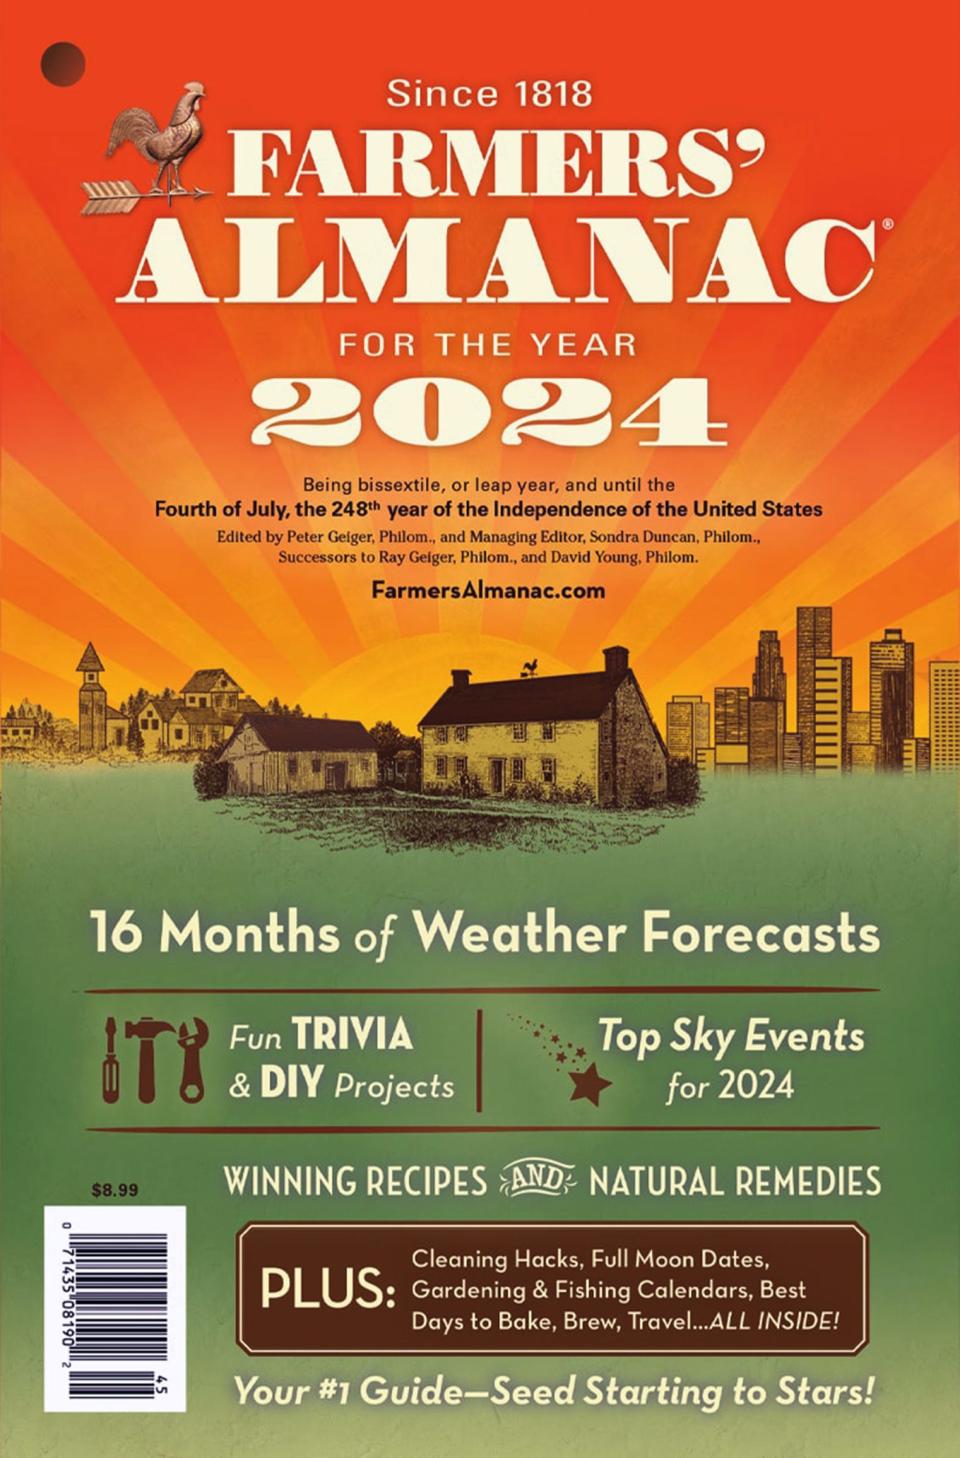 This is the cover for the 2024 "Farmers' Almanac."